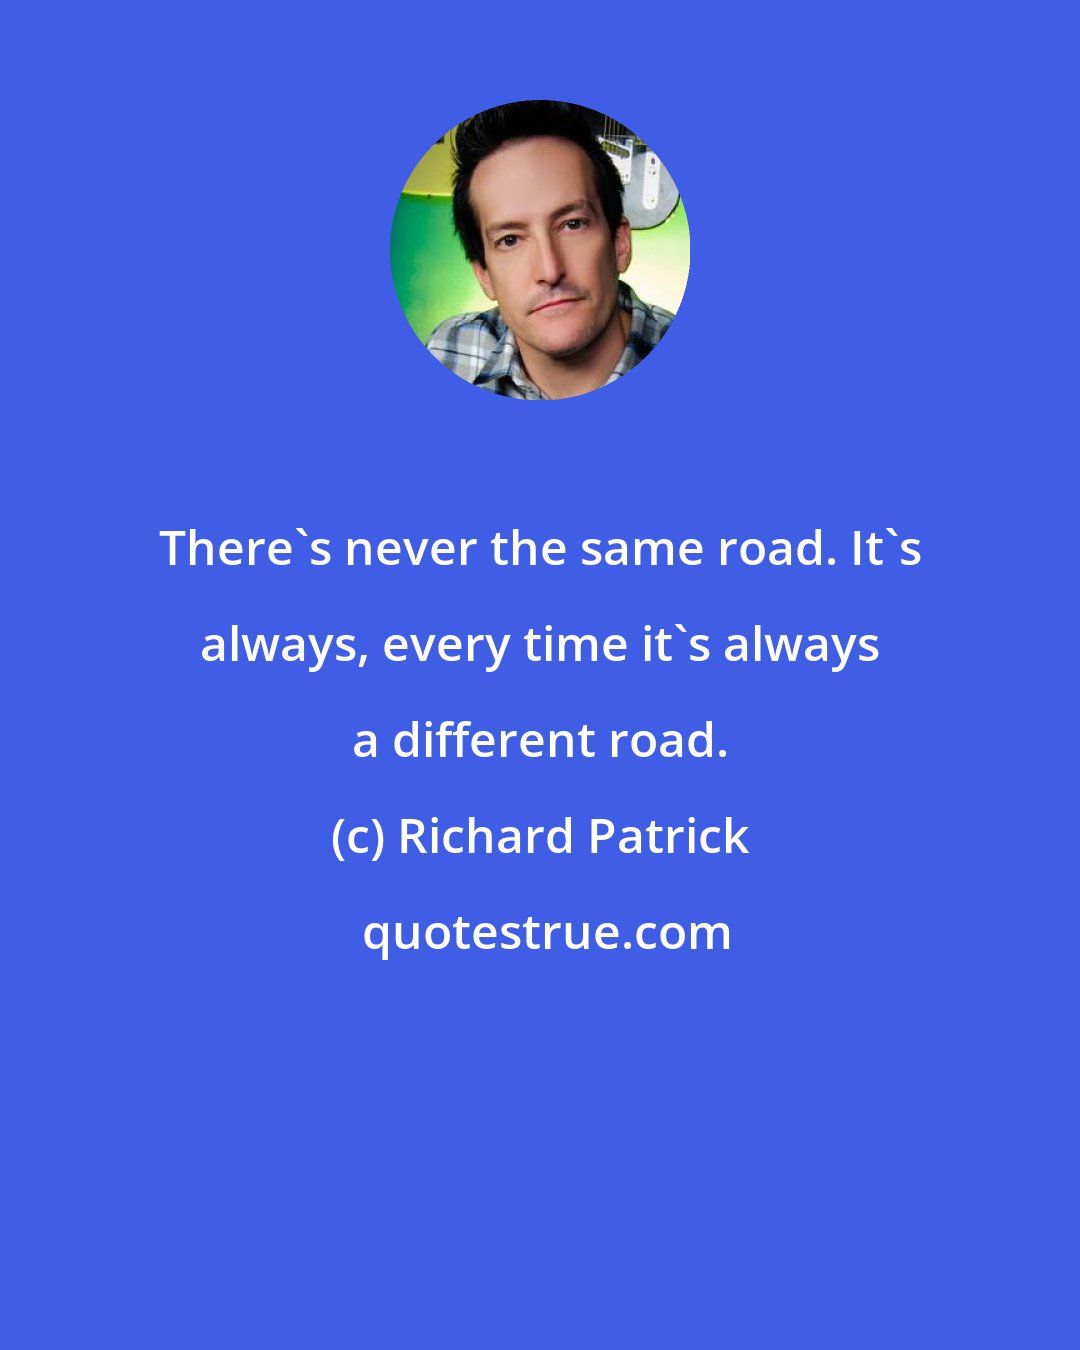 Richard Patrick: There's never the same road. It's always, every time it's always a different road.